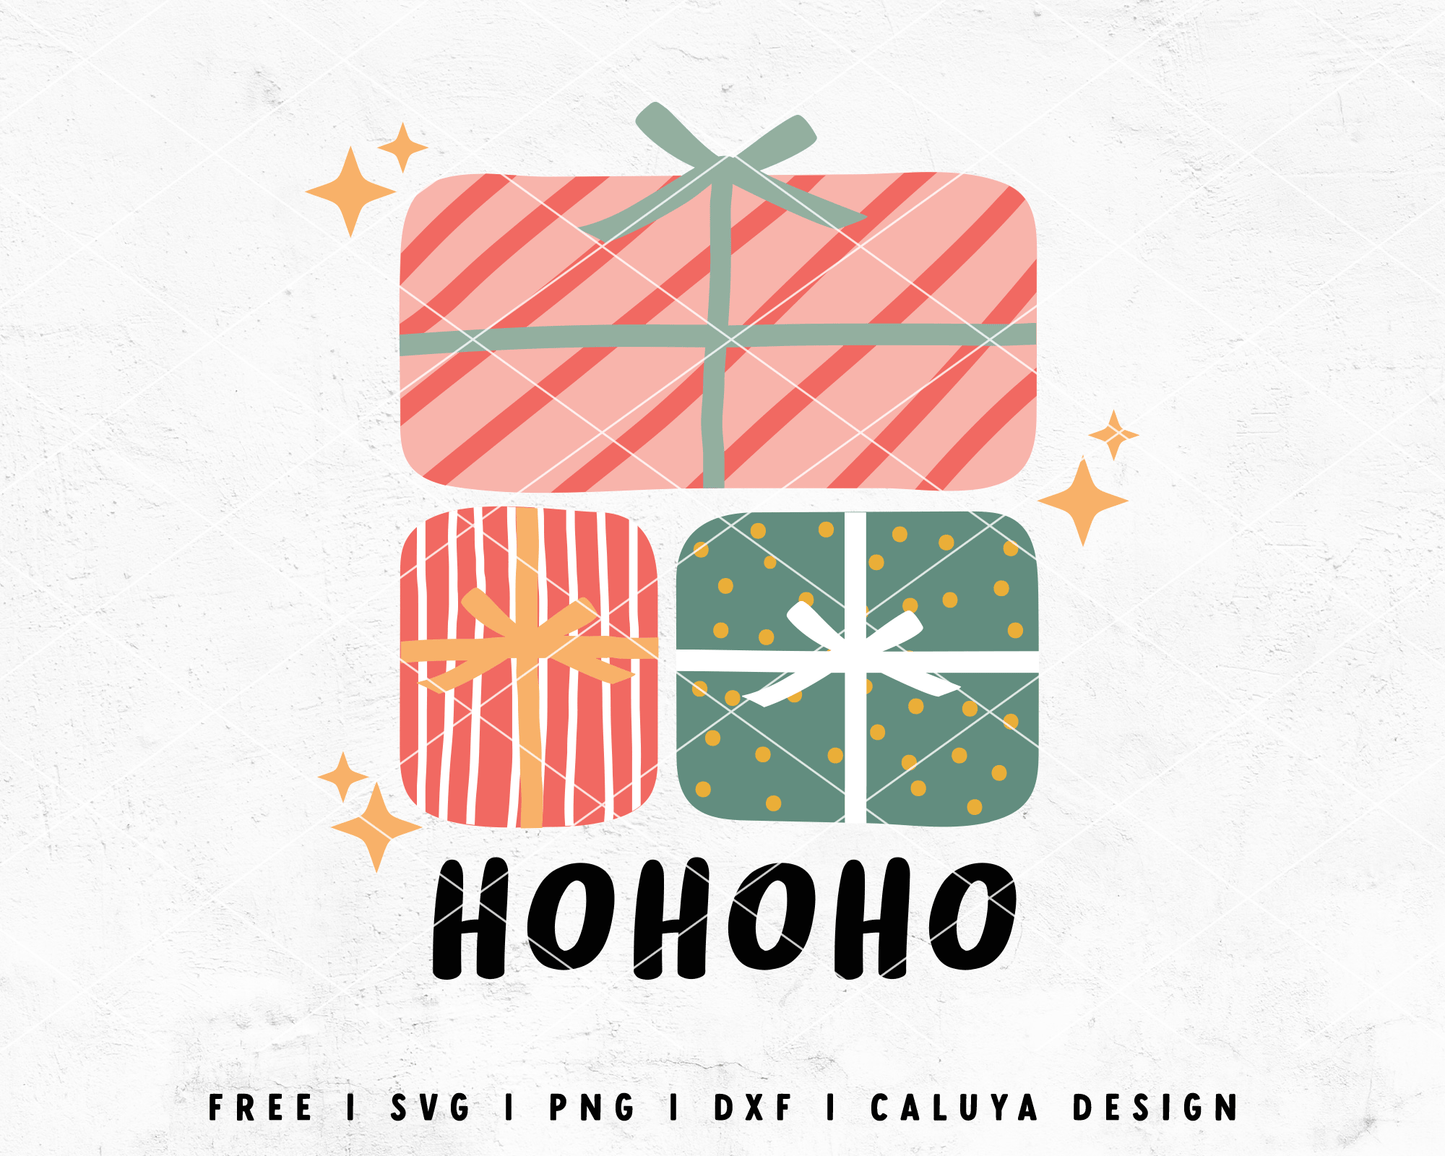 FREE Holiday Gift SVG | Christmas Gift Box SVG Cut File for Cricut, Cameo Silhouette | Free SVG Cut File